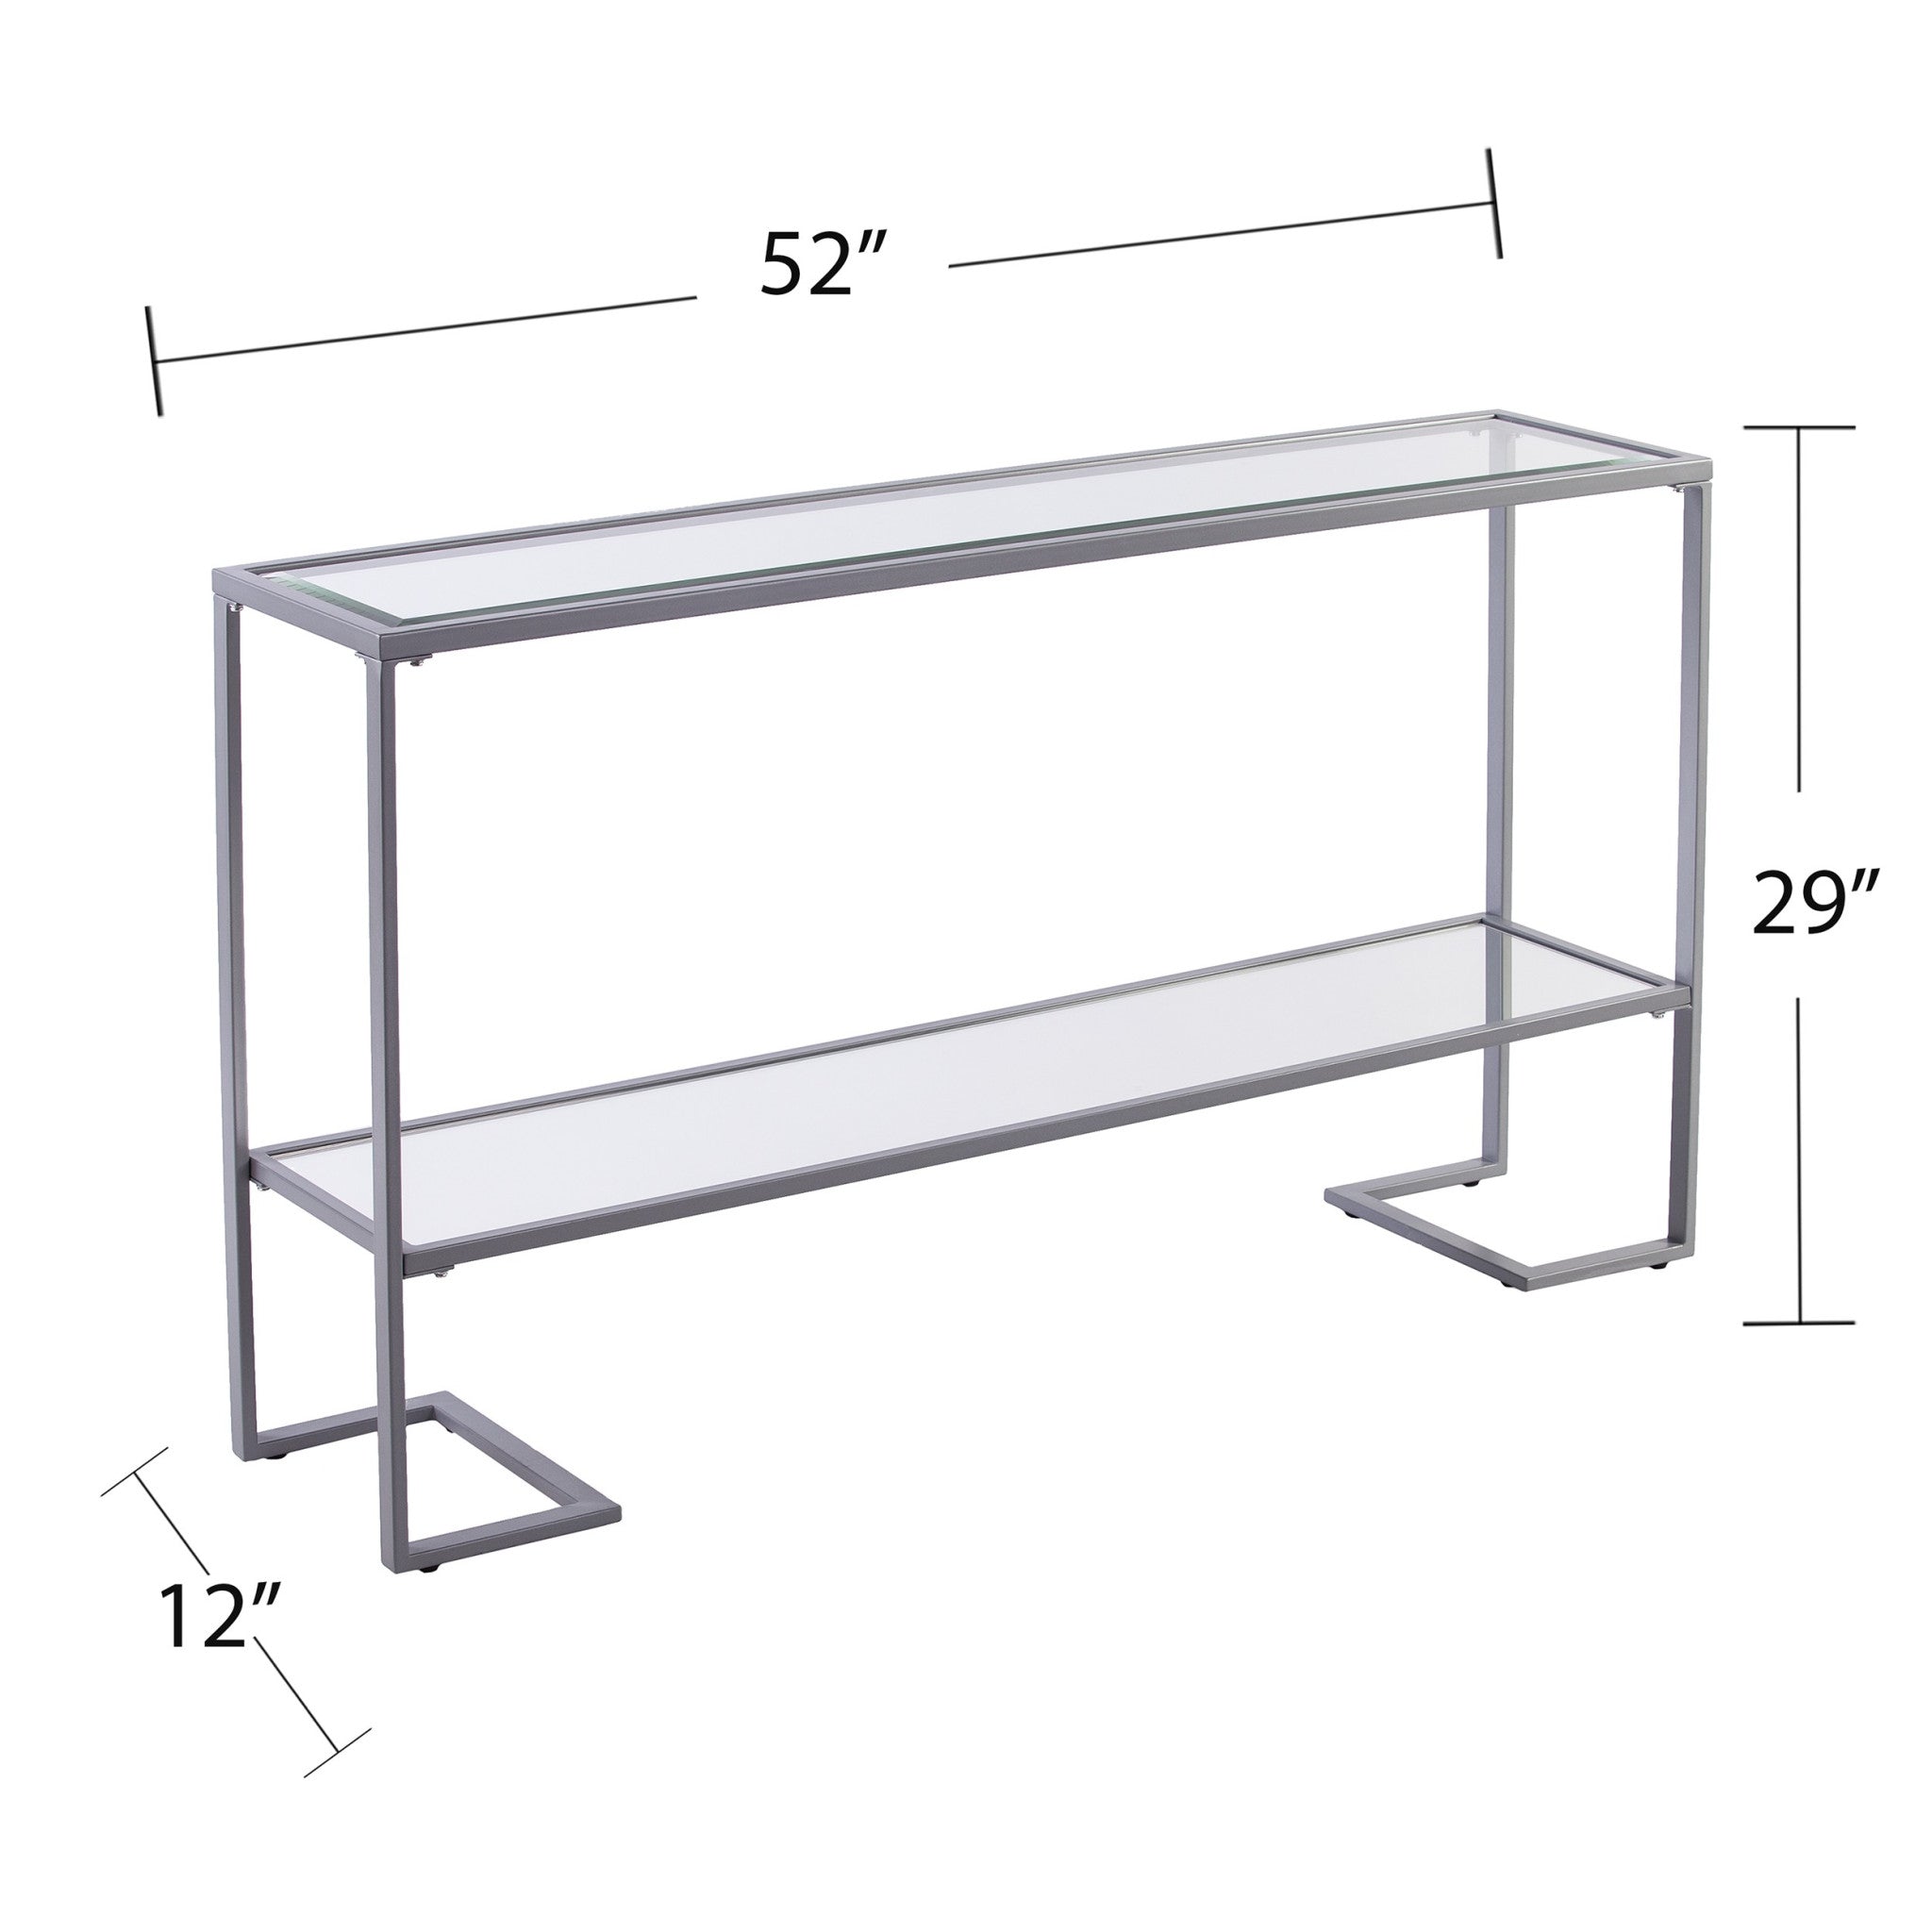 52" Clear and Silver Glass Mirrored Frame Console Table With Storage